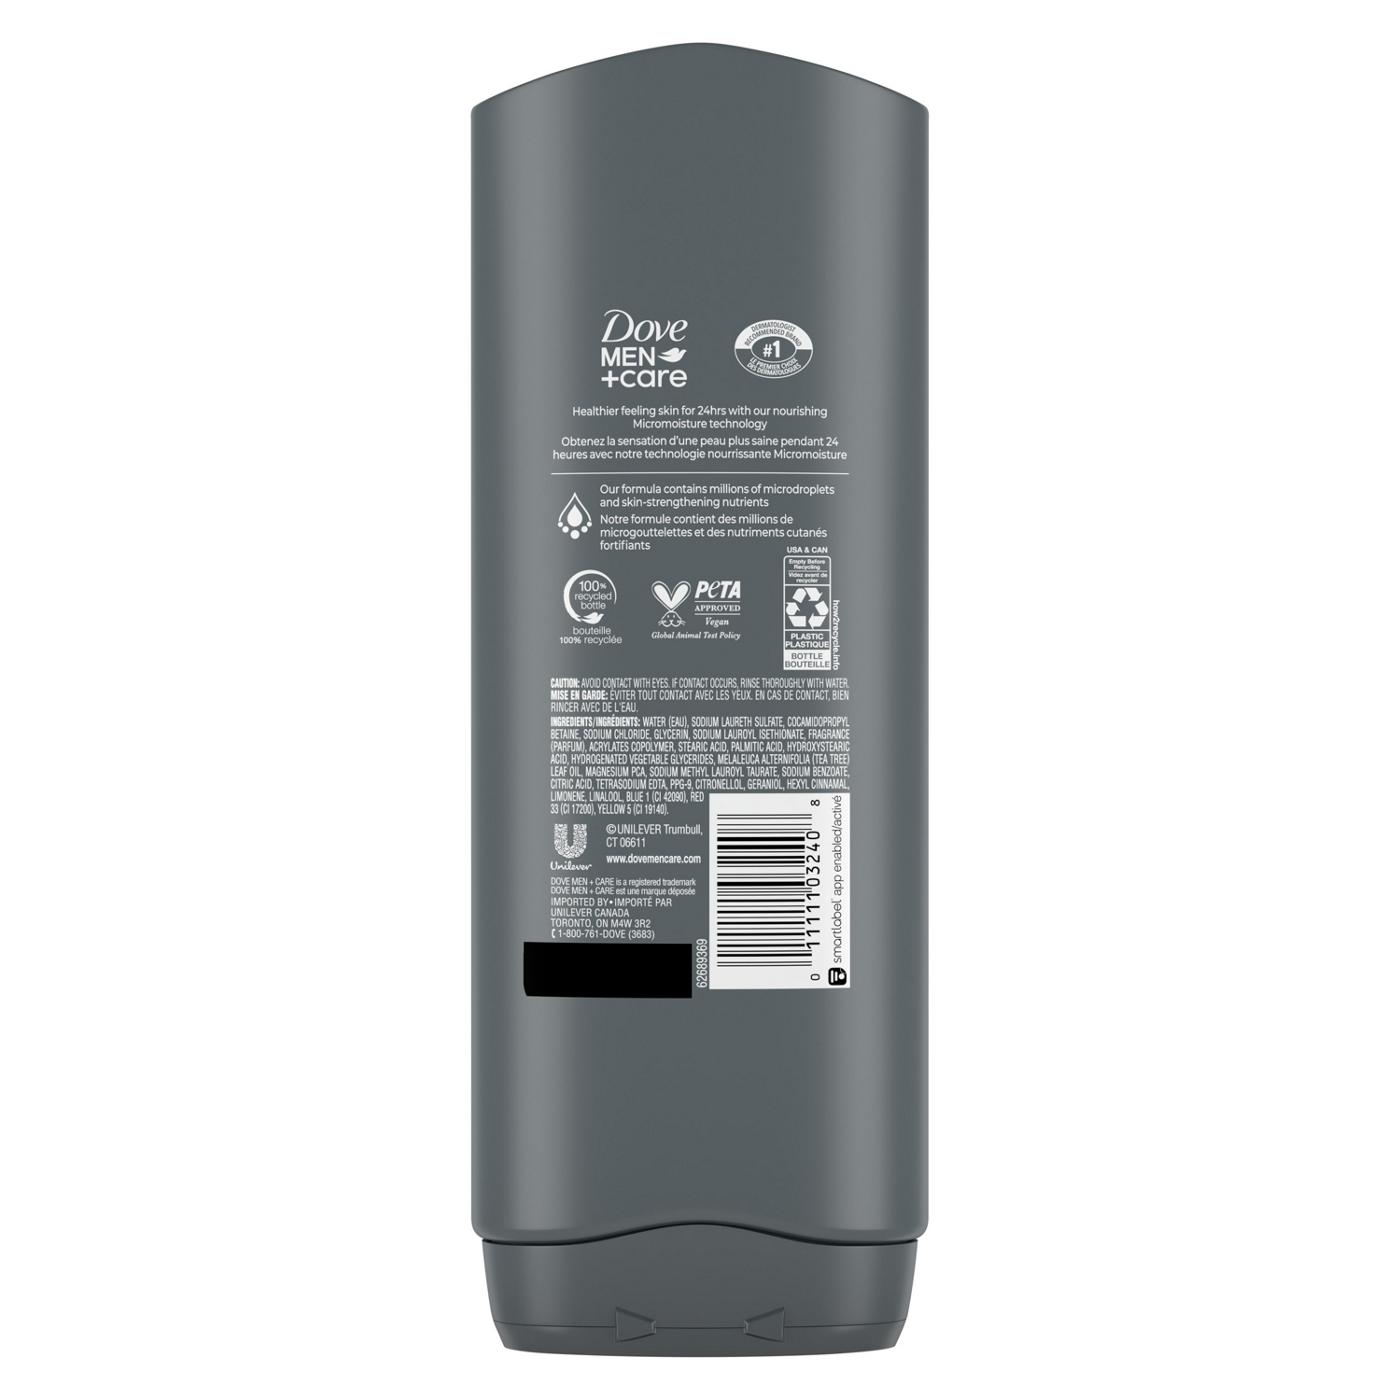 Dove Men+Care Revive 3 in 1 Wash with Tea Tree Oil; image 2 of 3